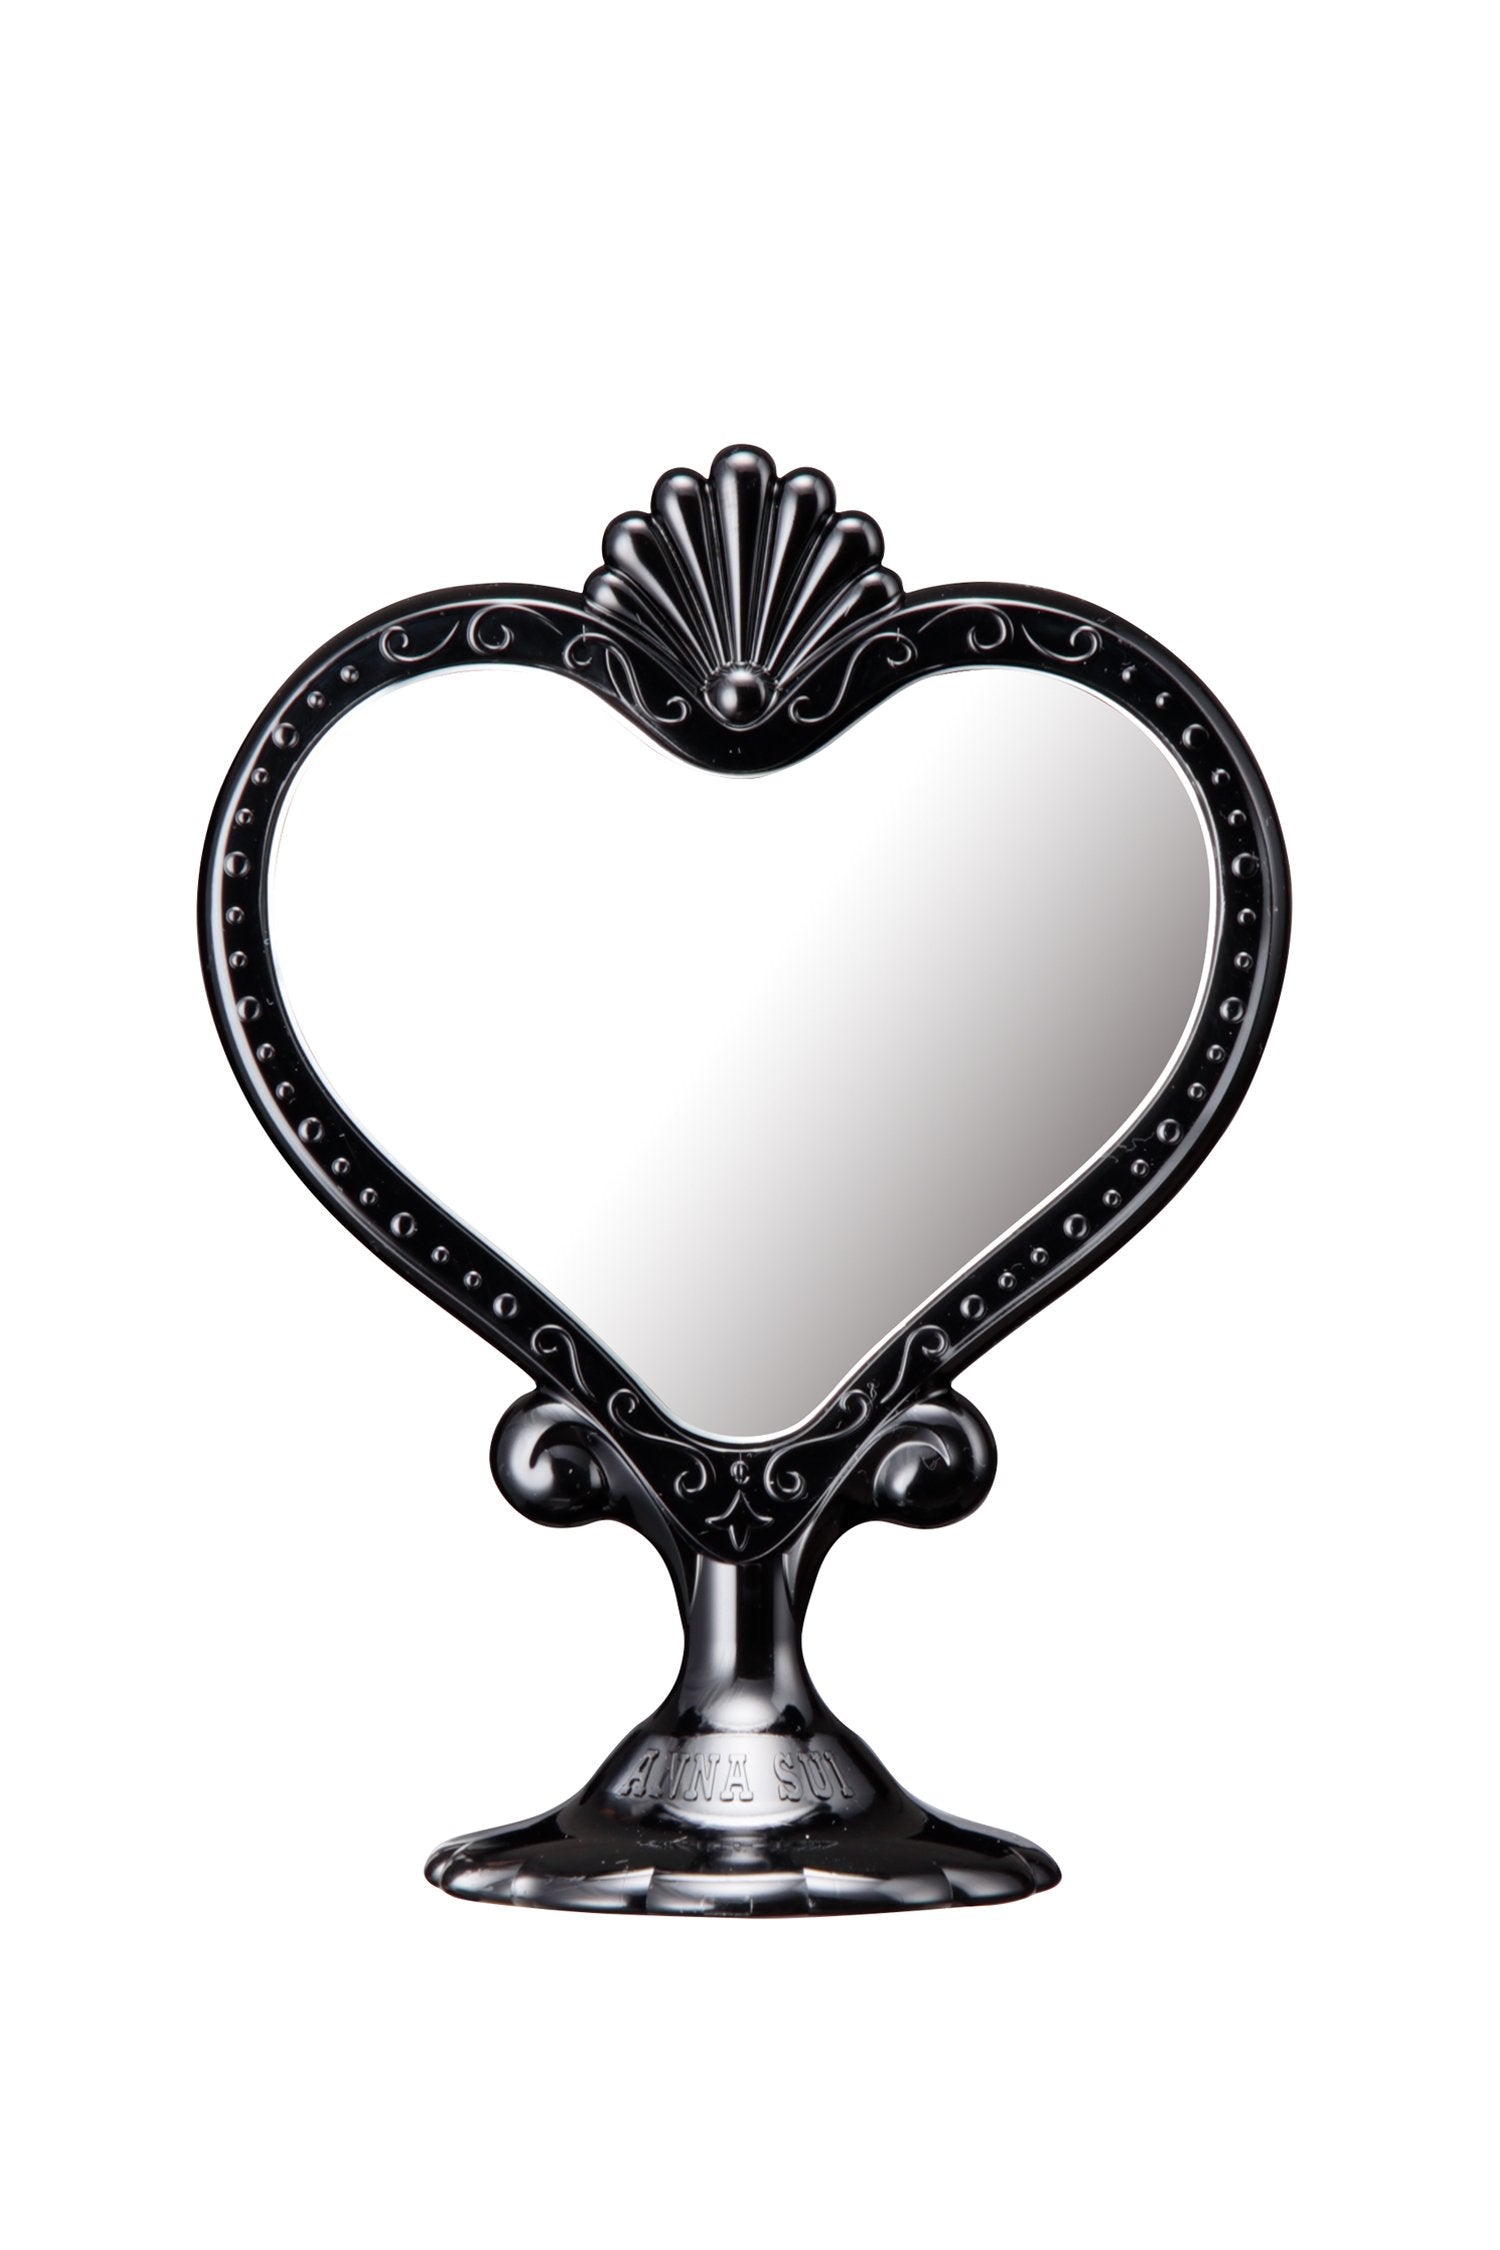 Black Stand Mirror in a heart-shaped mirror, on a stand with Anna branding